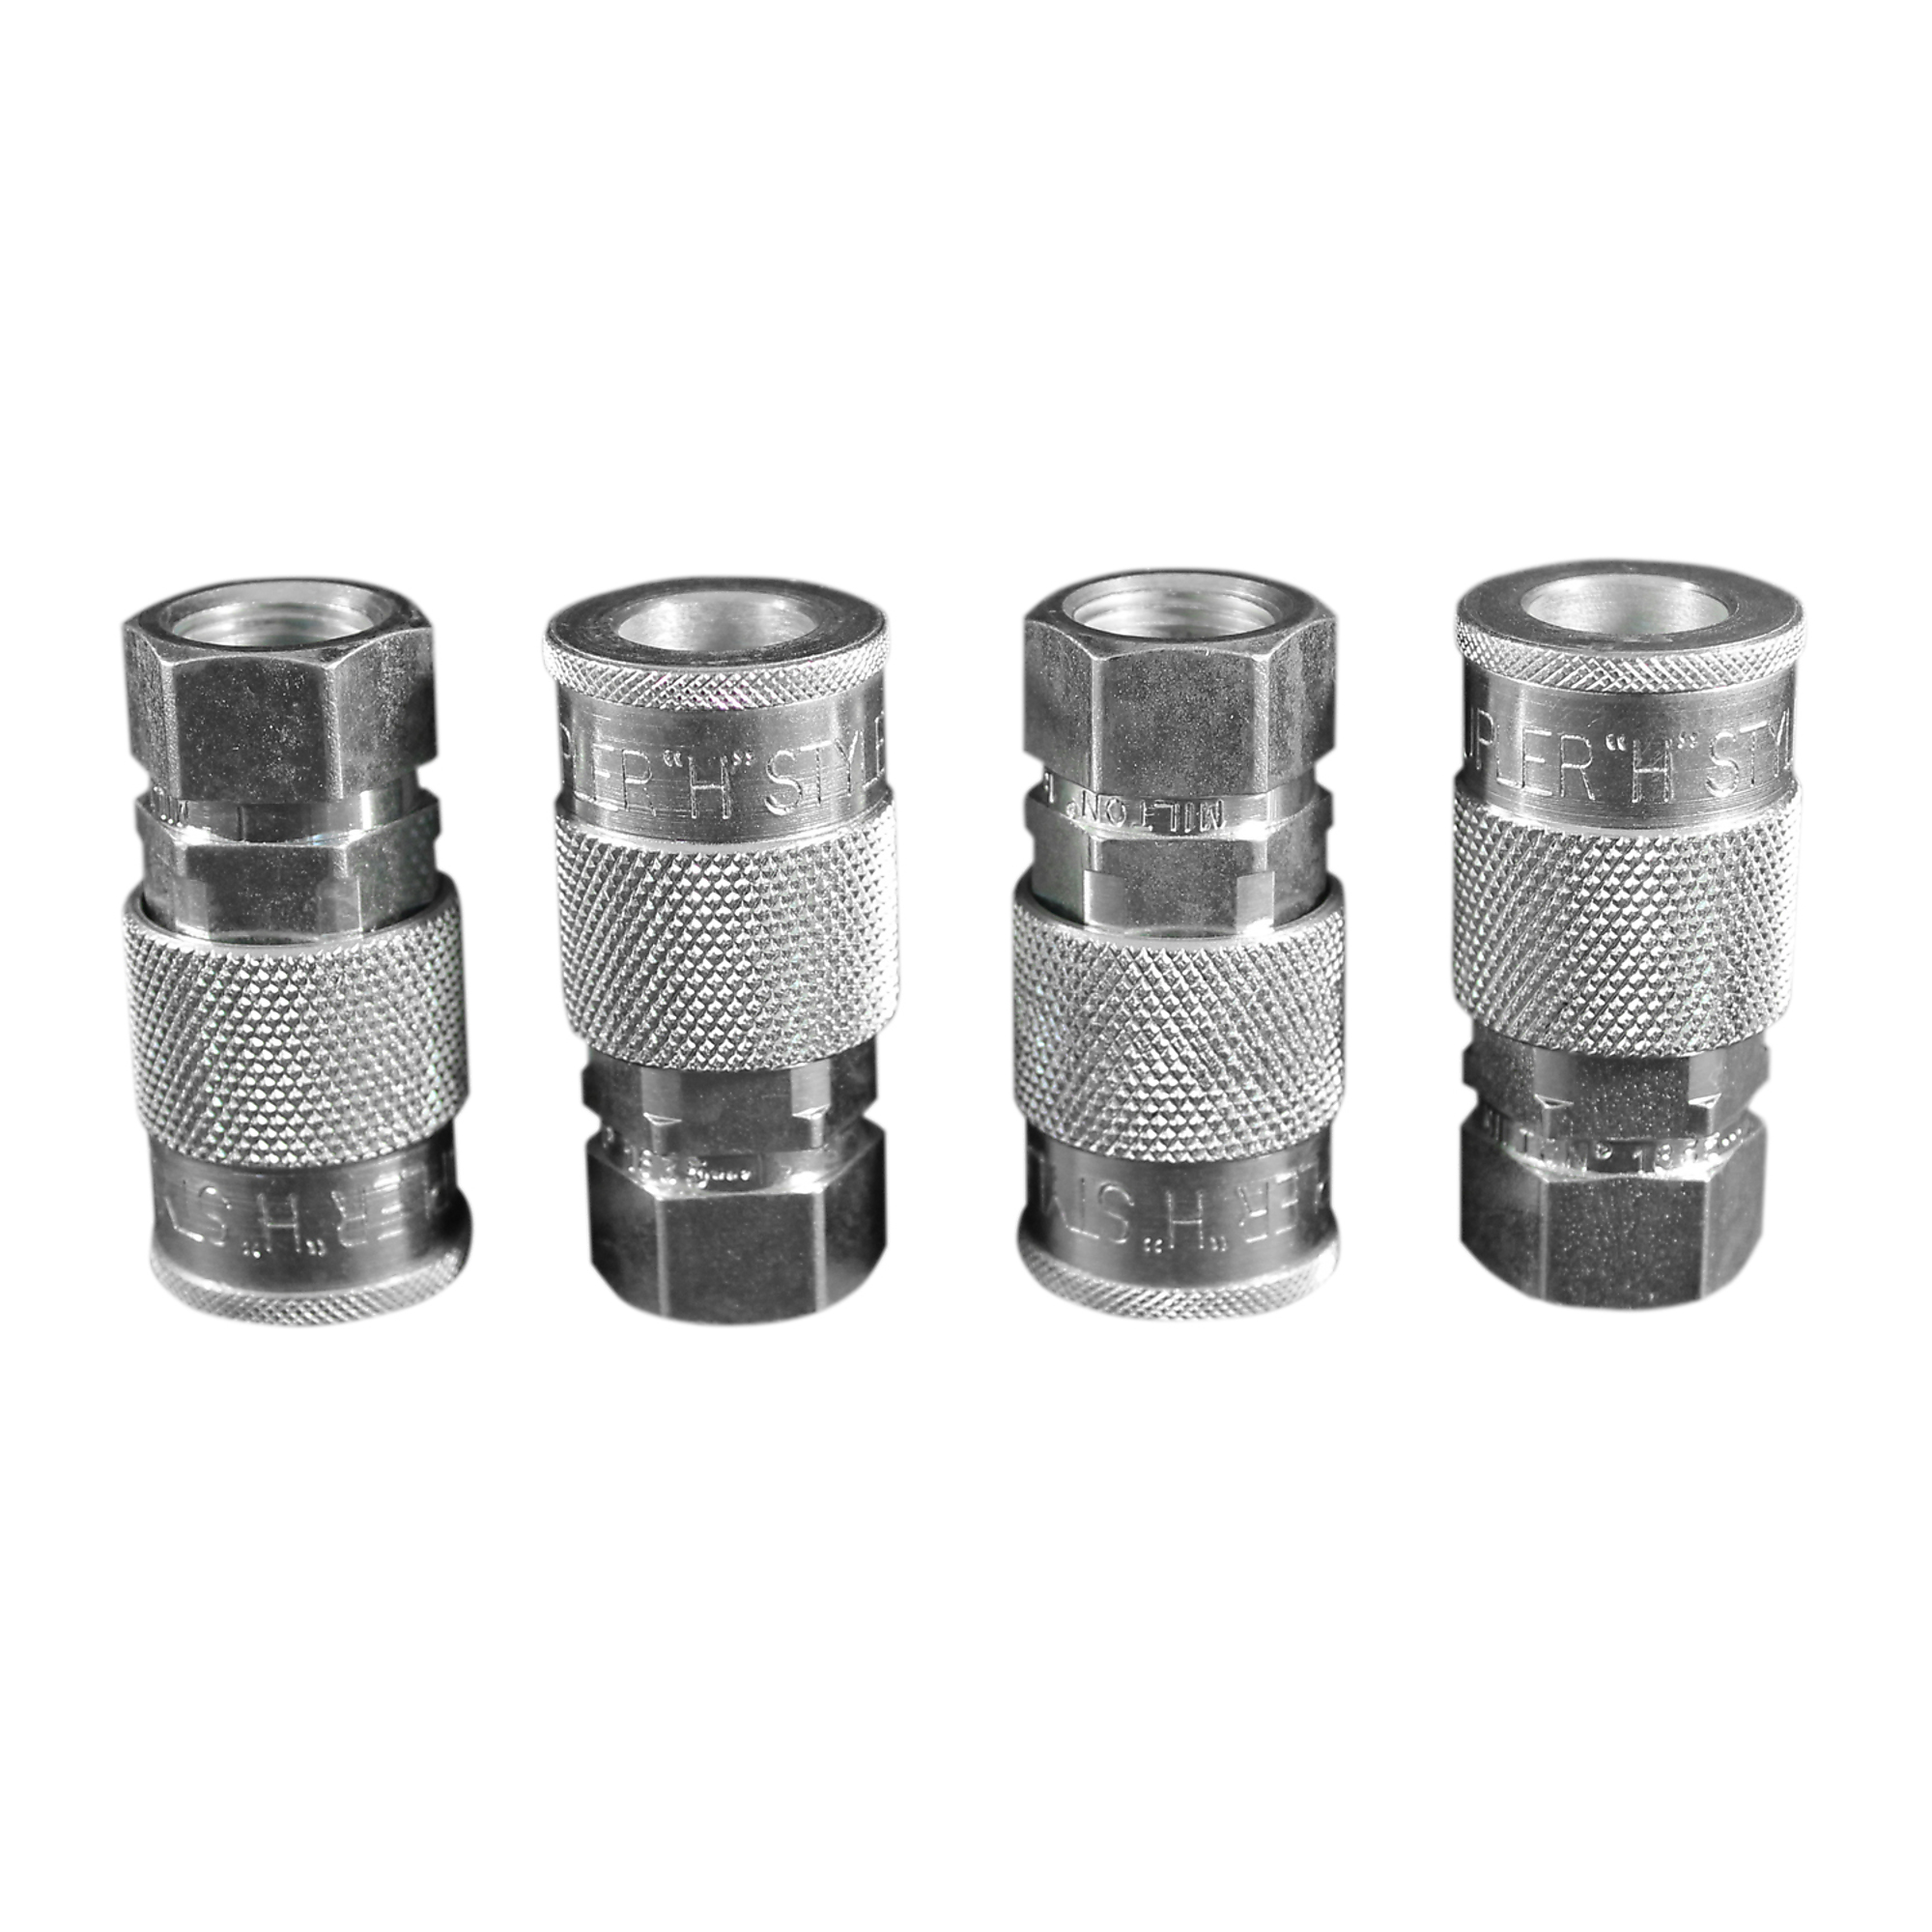 Milton, 3/8Inch Female Body H-Style - 4 Pack, Coupler Size 3/8 in, Model s-1835-4